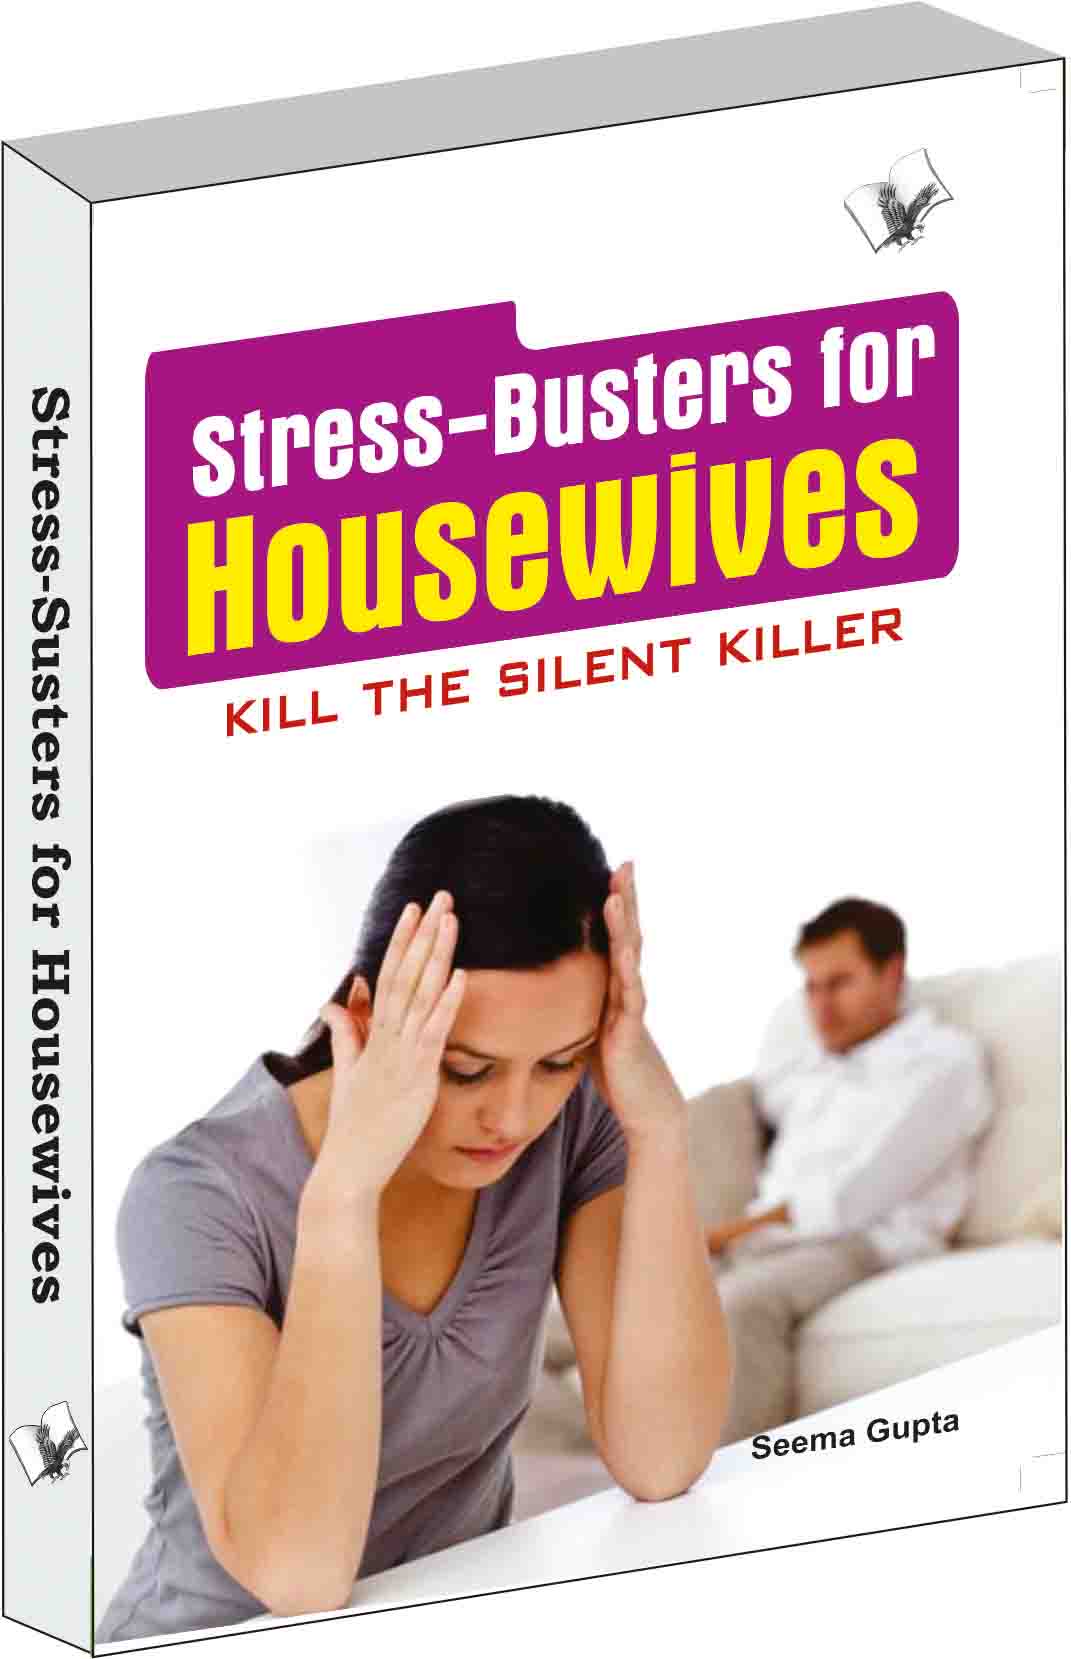 stress-busters-for-housewives-how-to-overcome-stresses-that-housewives-suffer-